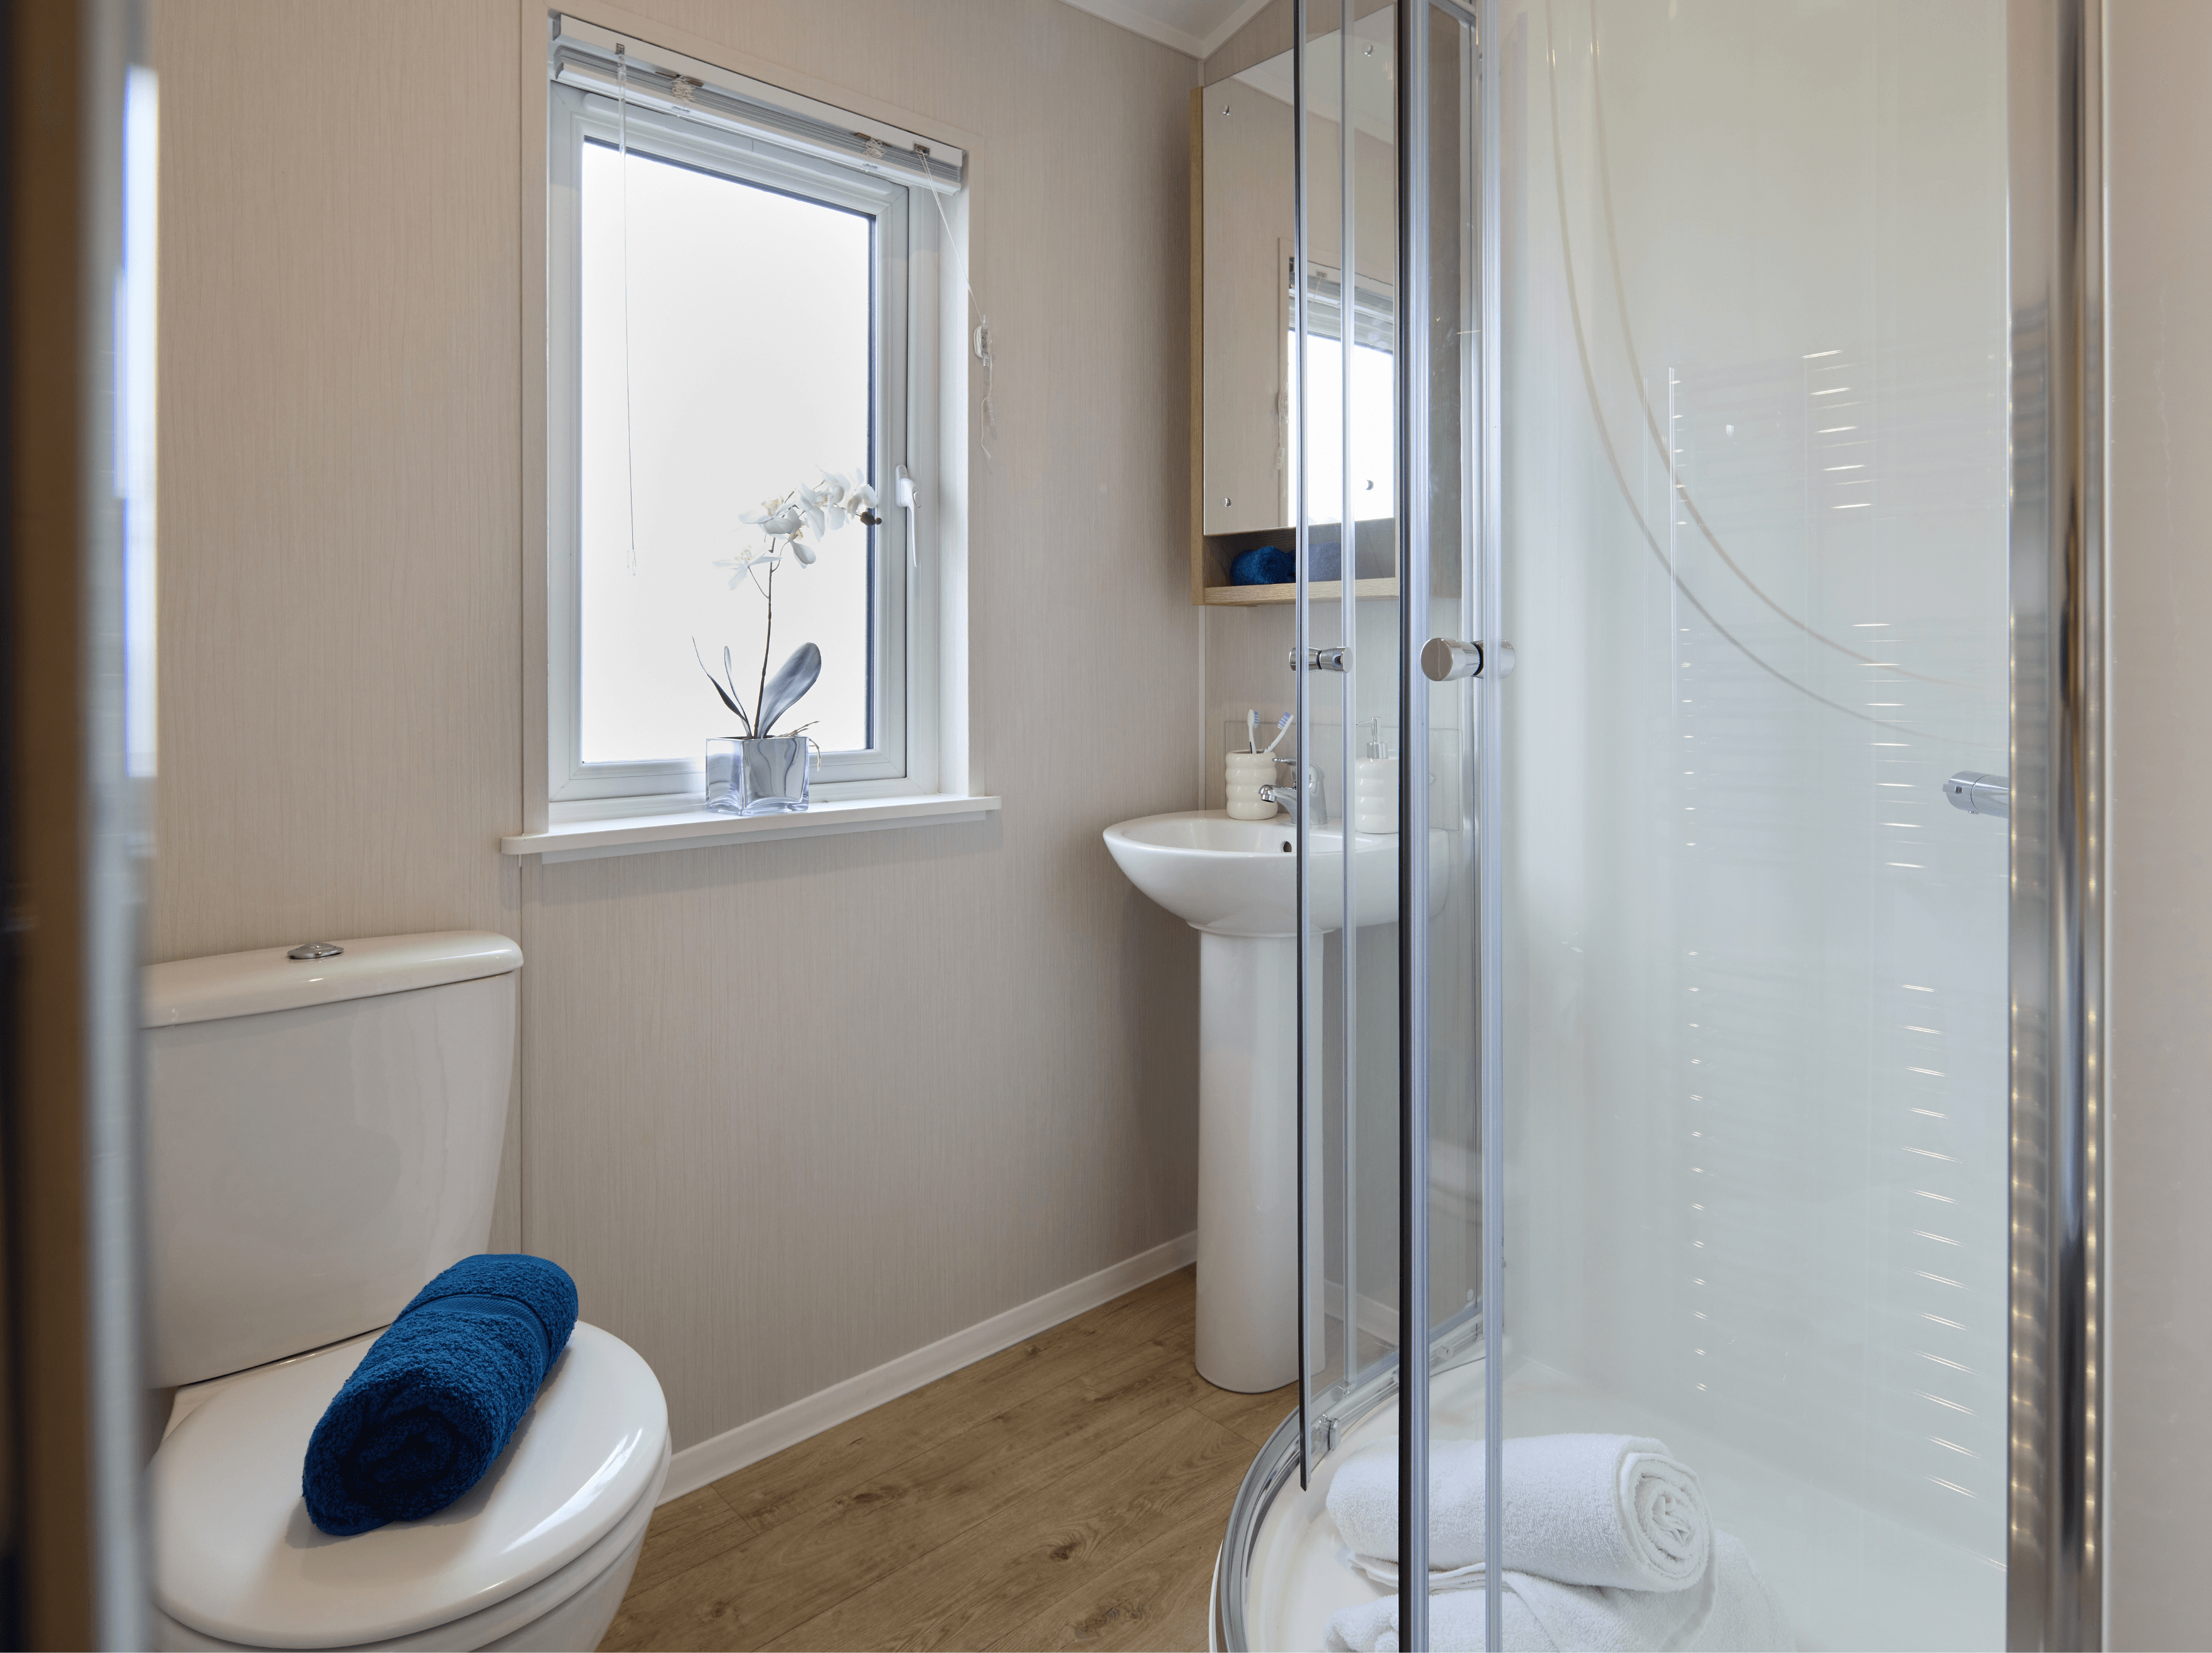 The en-suite bathroom in the Willerby New Holland holiday lodge. There is a shower cubicle and sink with a mirror unit above it. A large window lets light in. 